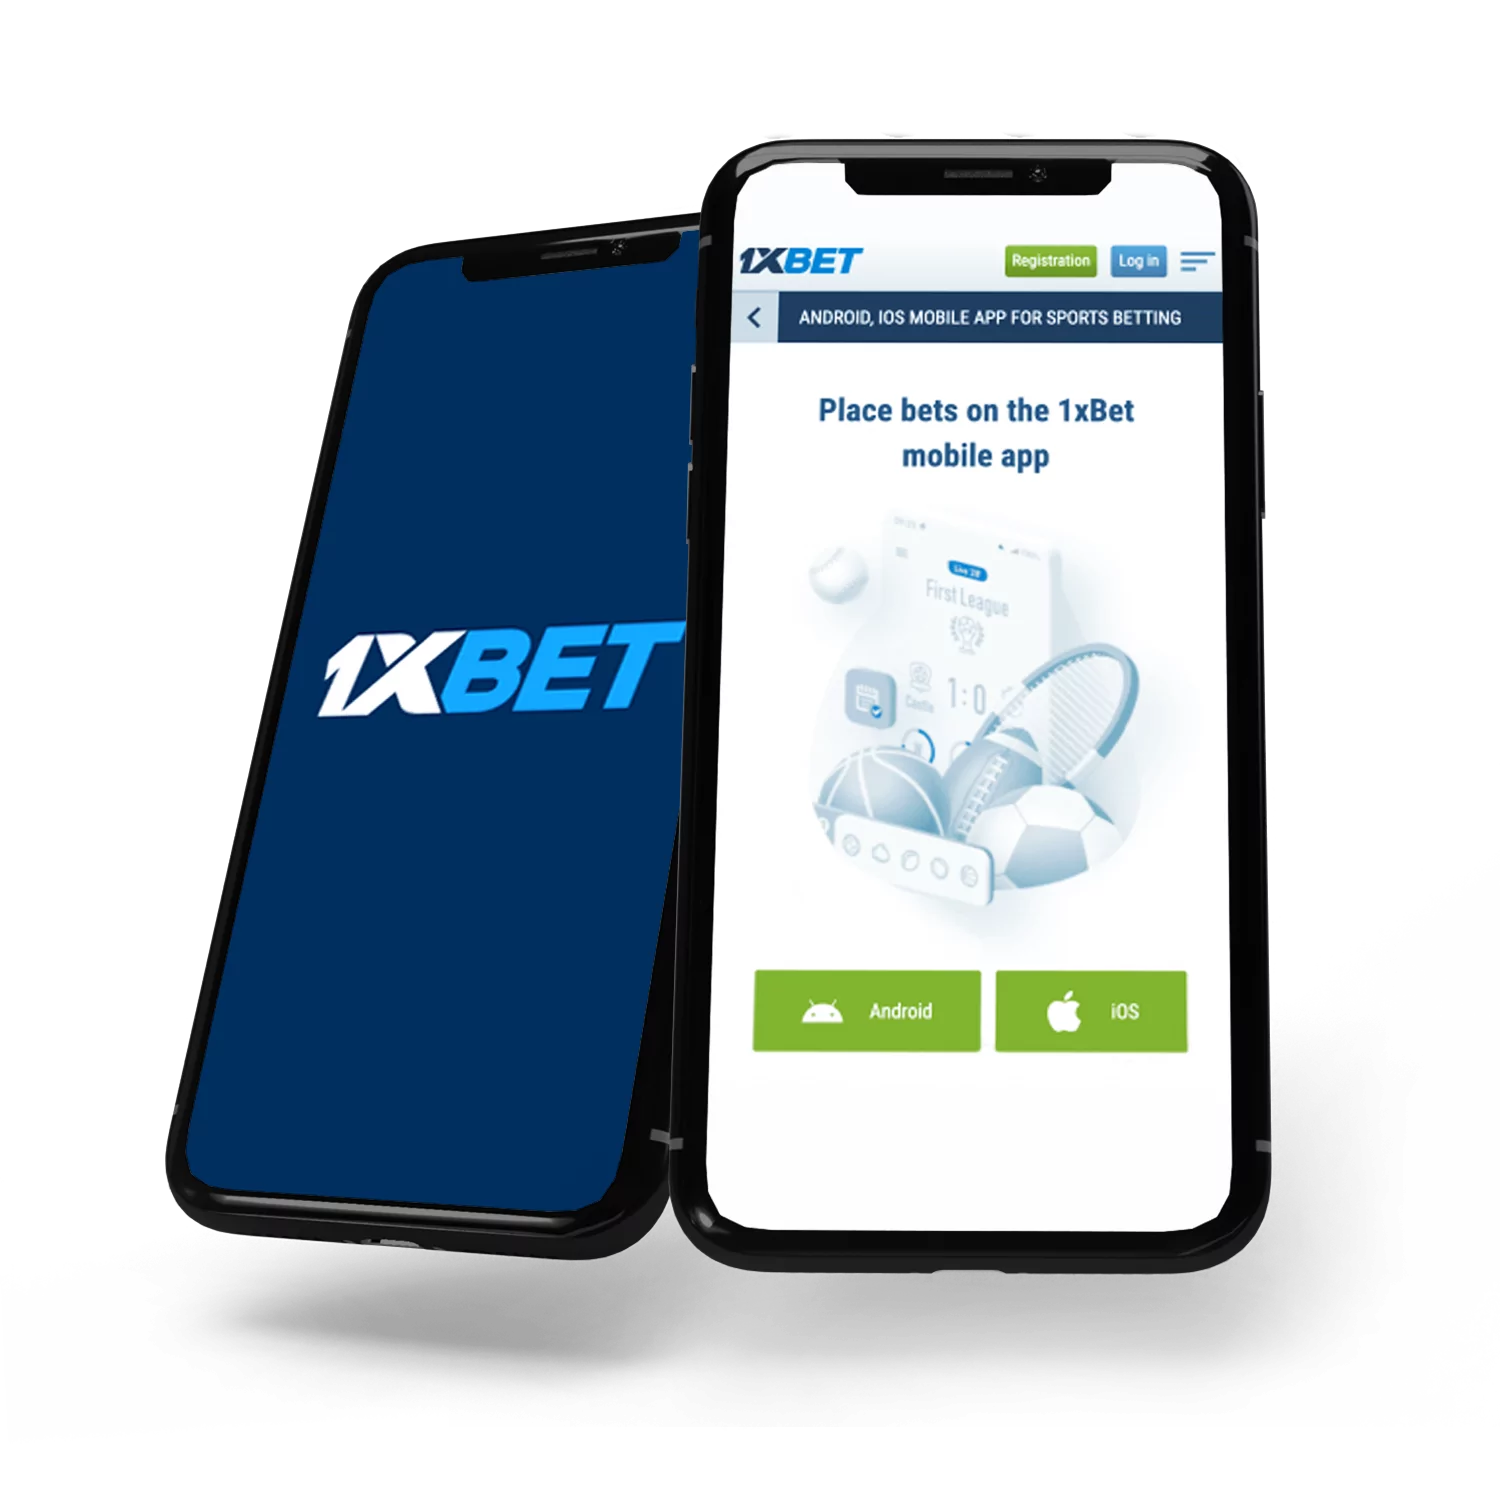 Sick And Tired Of Doing 1xbet pc The Old Way? Read This